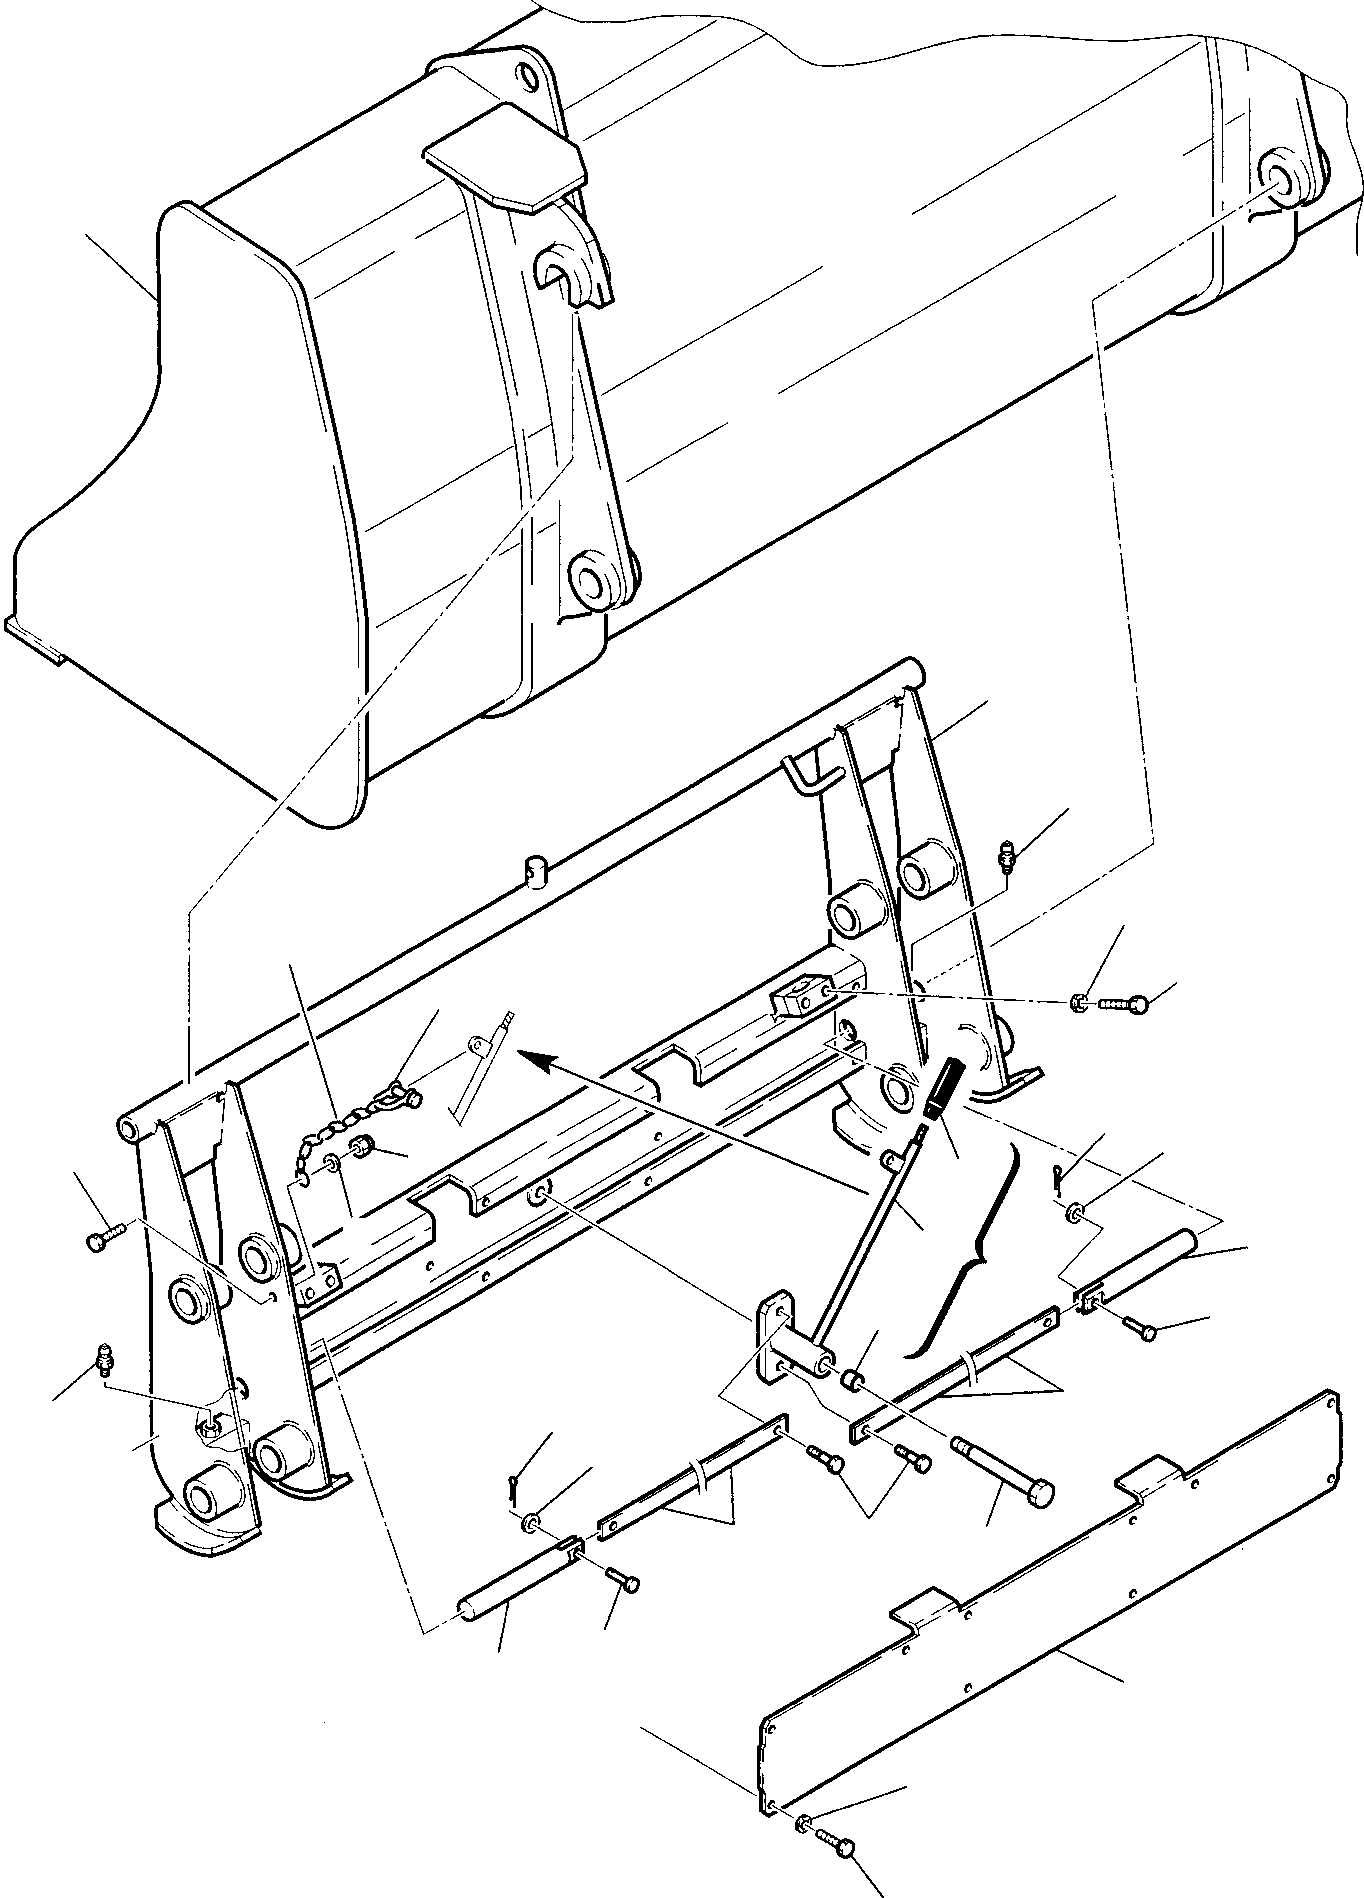 Part 8. QUICK MECHANICAL COUPLING FOR BUCKET (OPTIONAL) [7050]